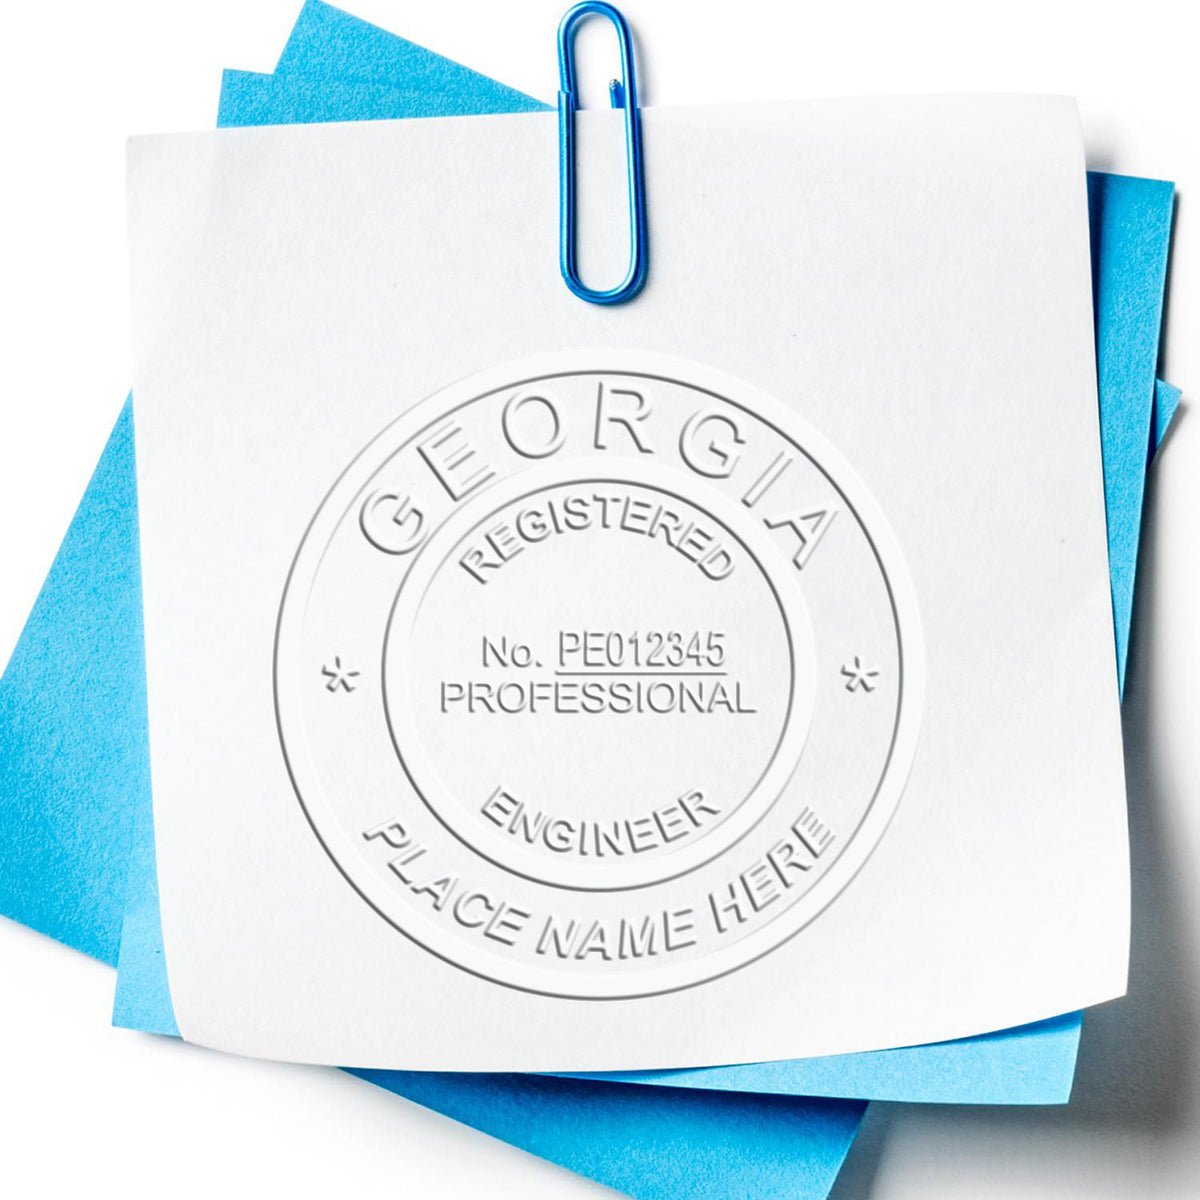 The Gift Georgia Engineer Seal stamp impression comes to life with a crisp, detailed image stamped on paper - showcasing true professional quality.